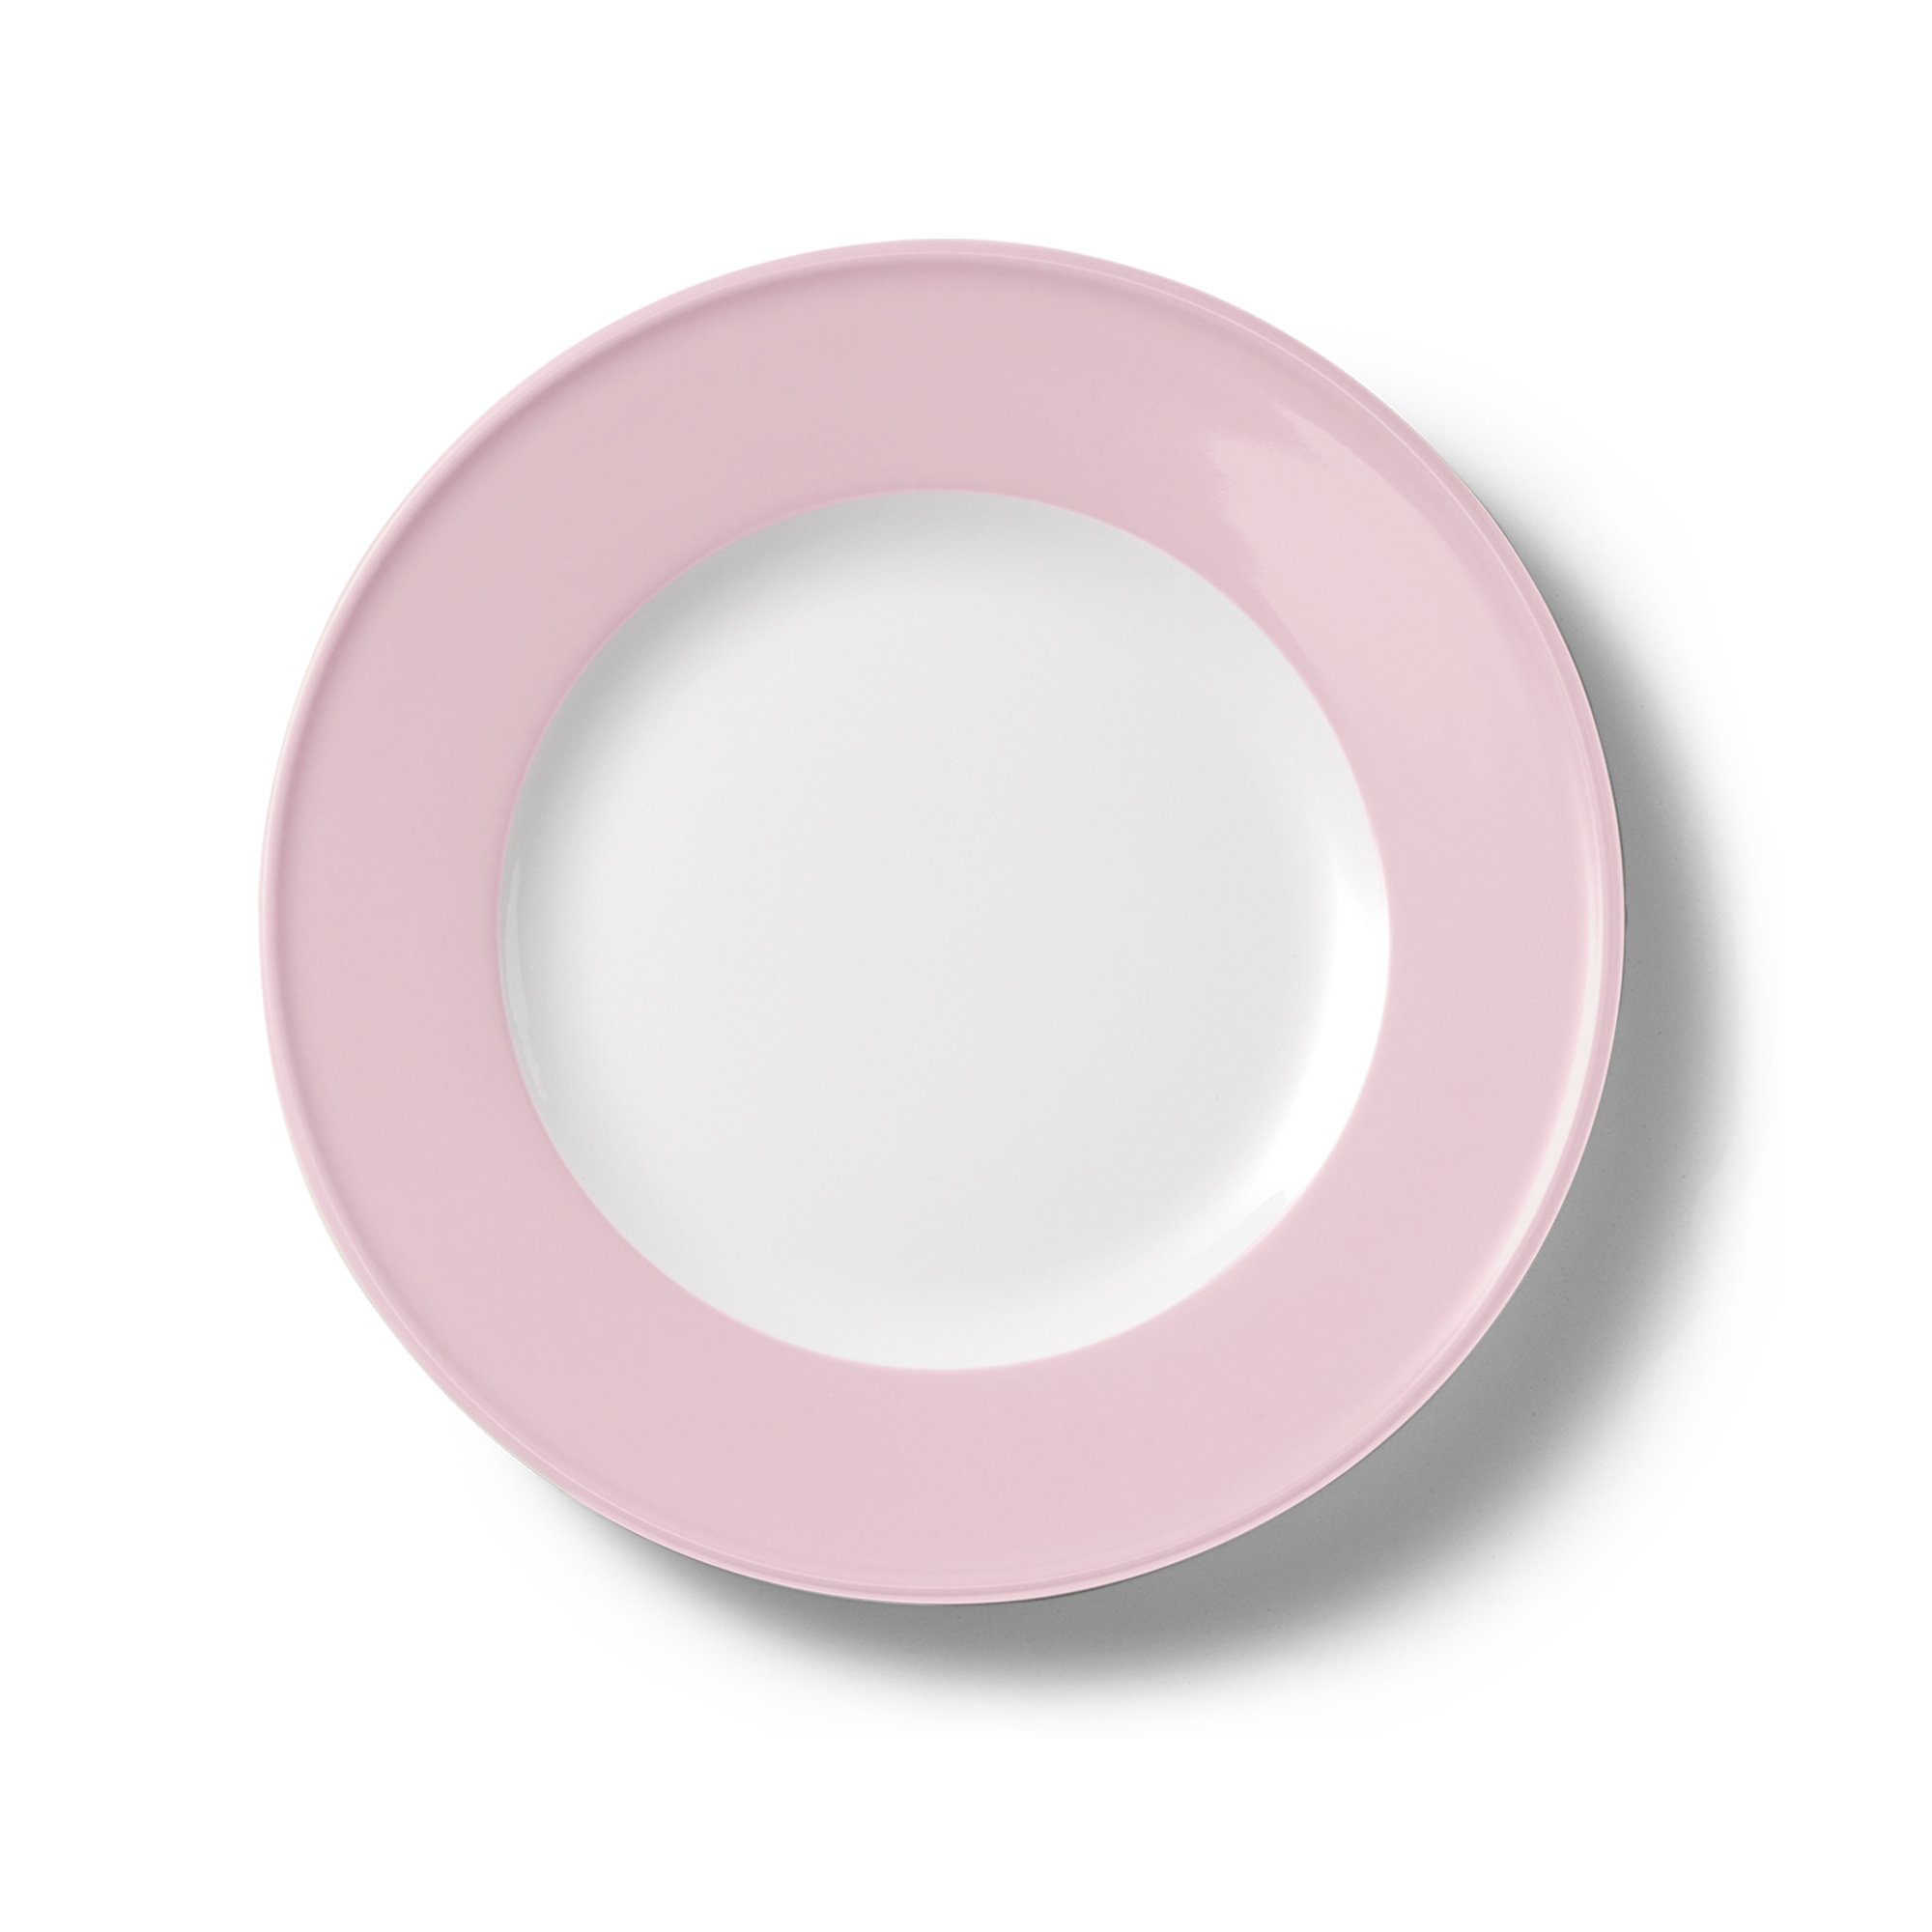 Dibbern dinner plate, Fine porcelain, Sophisticated style, Classy tableware, 2000x2000 HD Phone